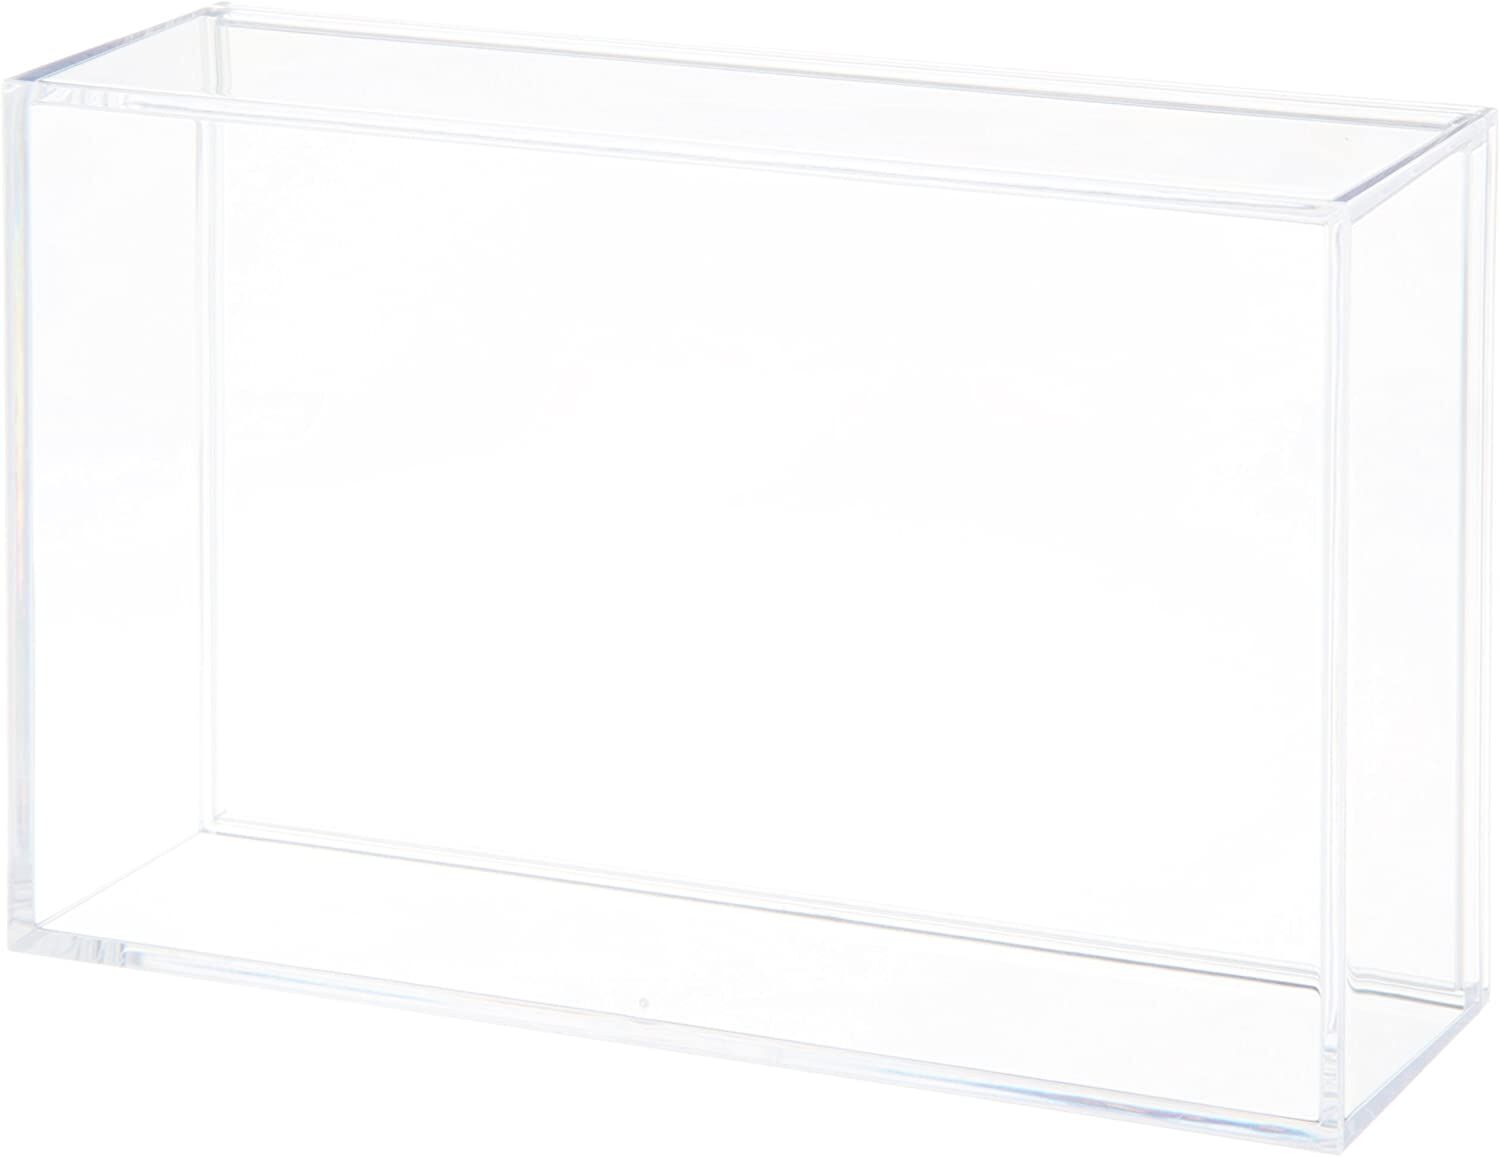 (PAPER THEATER) PAPER THEATER DISPLAY CASE LARGE